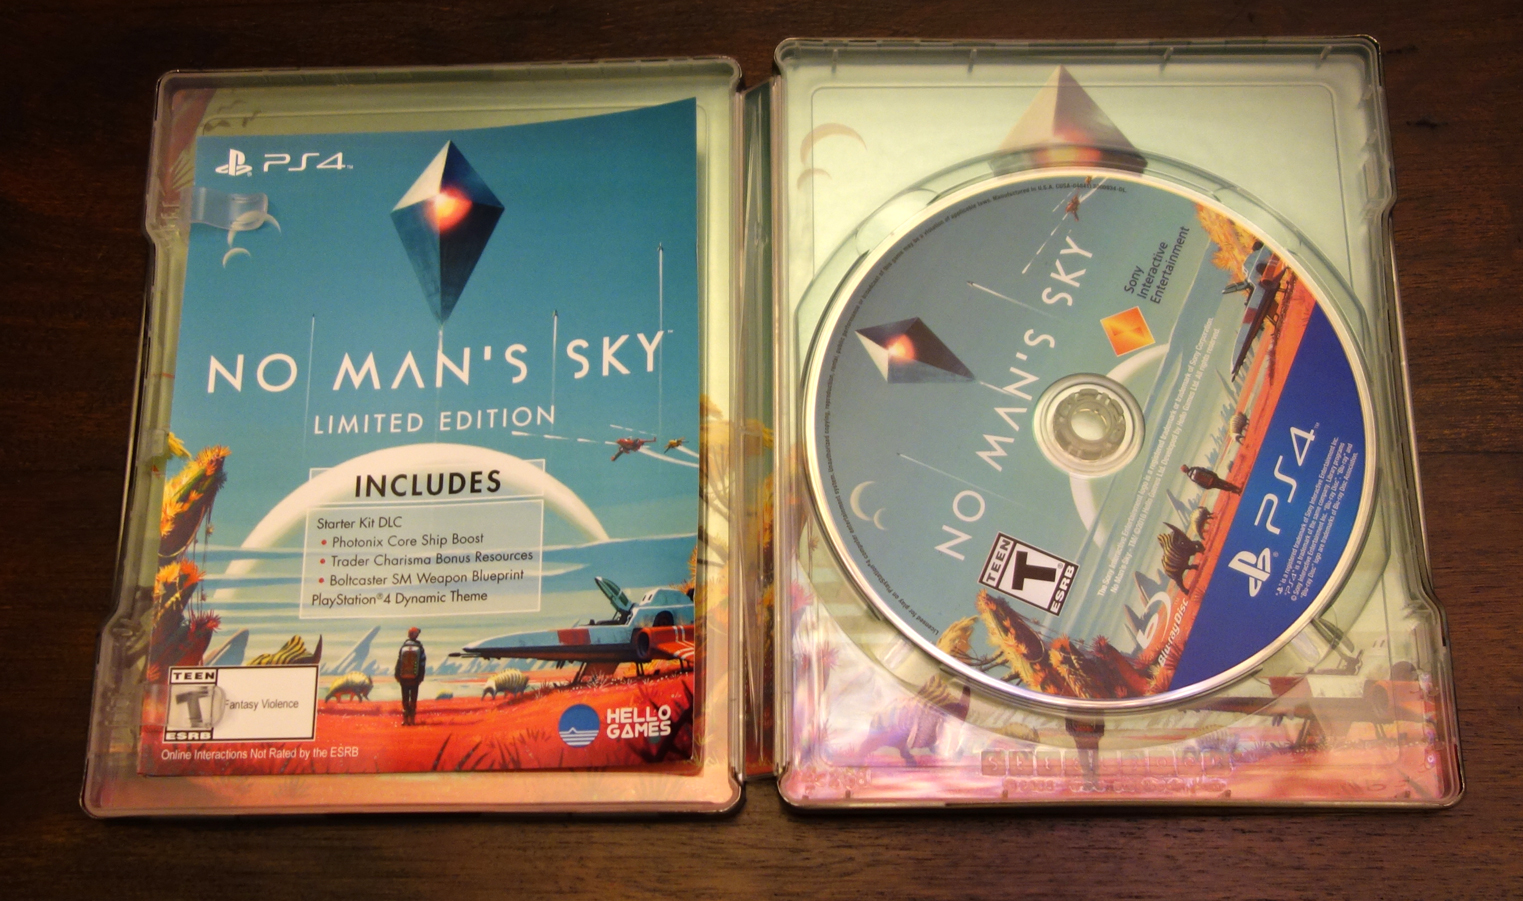 No Man's Sky Limited Edition PS4 digital content